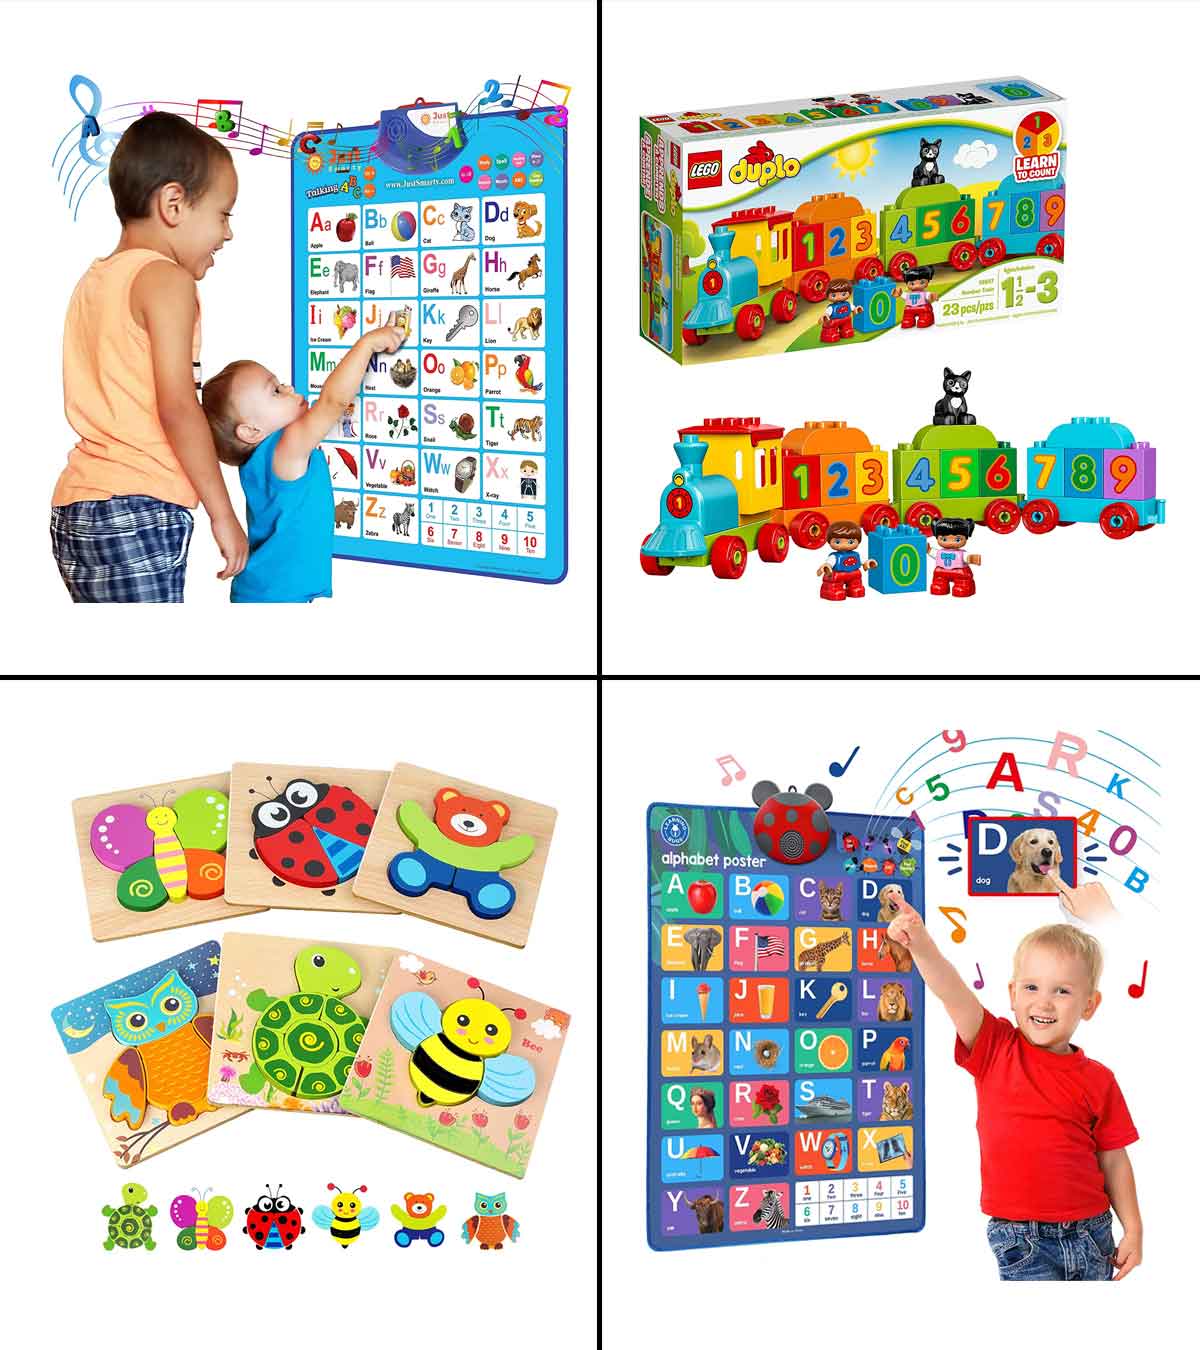 https://www.momjunction.com/wp-content/uploads/2021/08/11-Best-Educational-Toys-For-Two-Year-Olds-In-2021.jpg